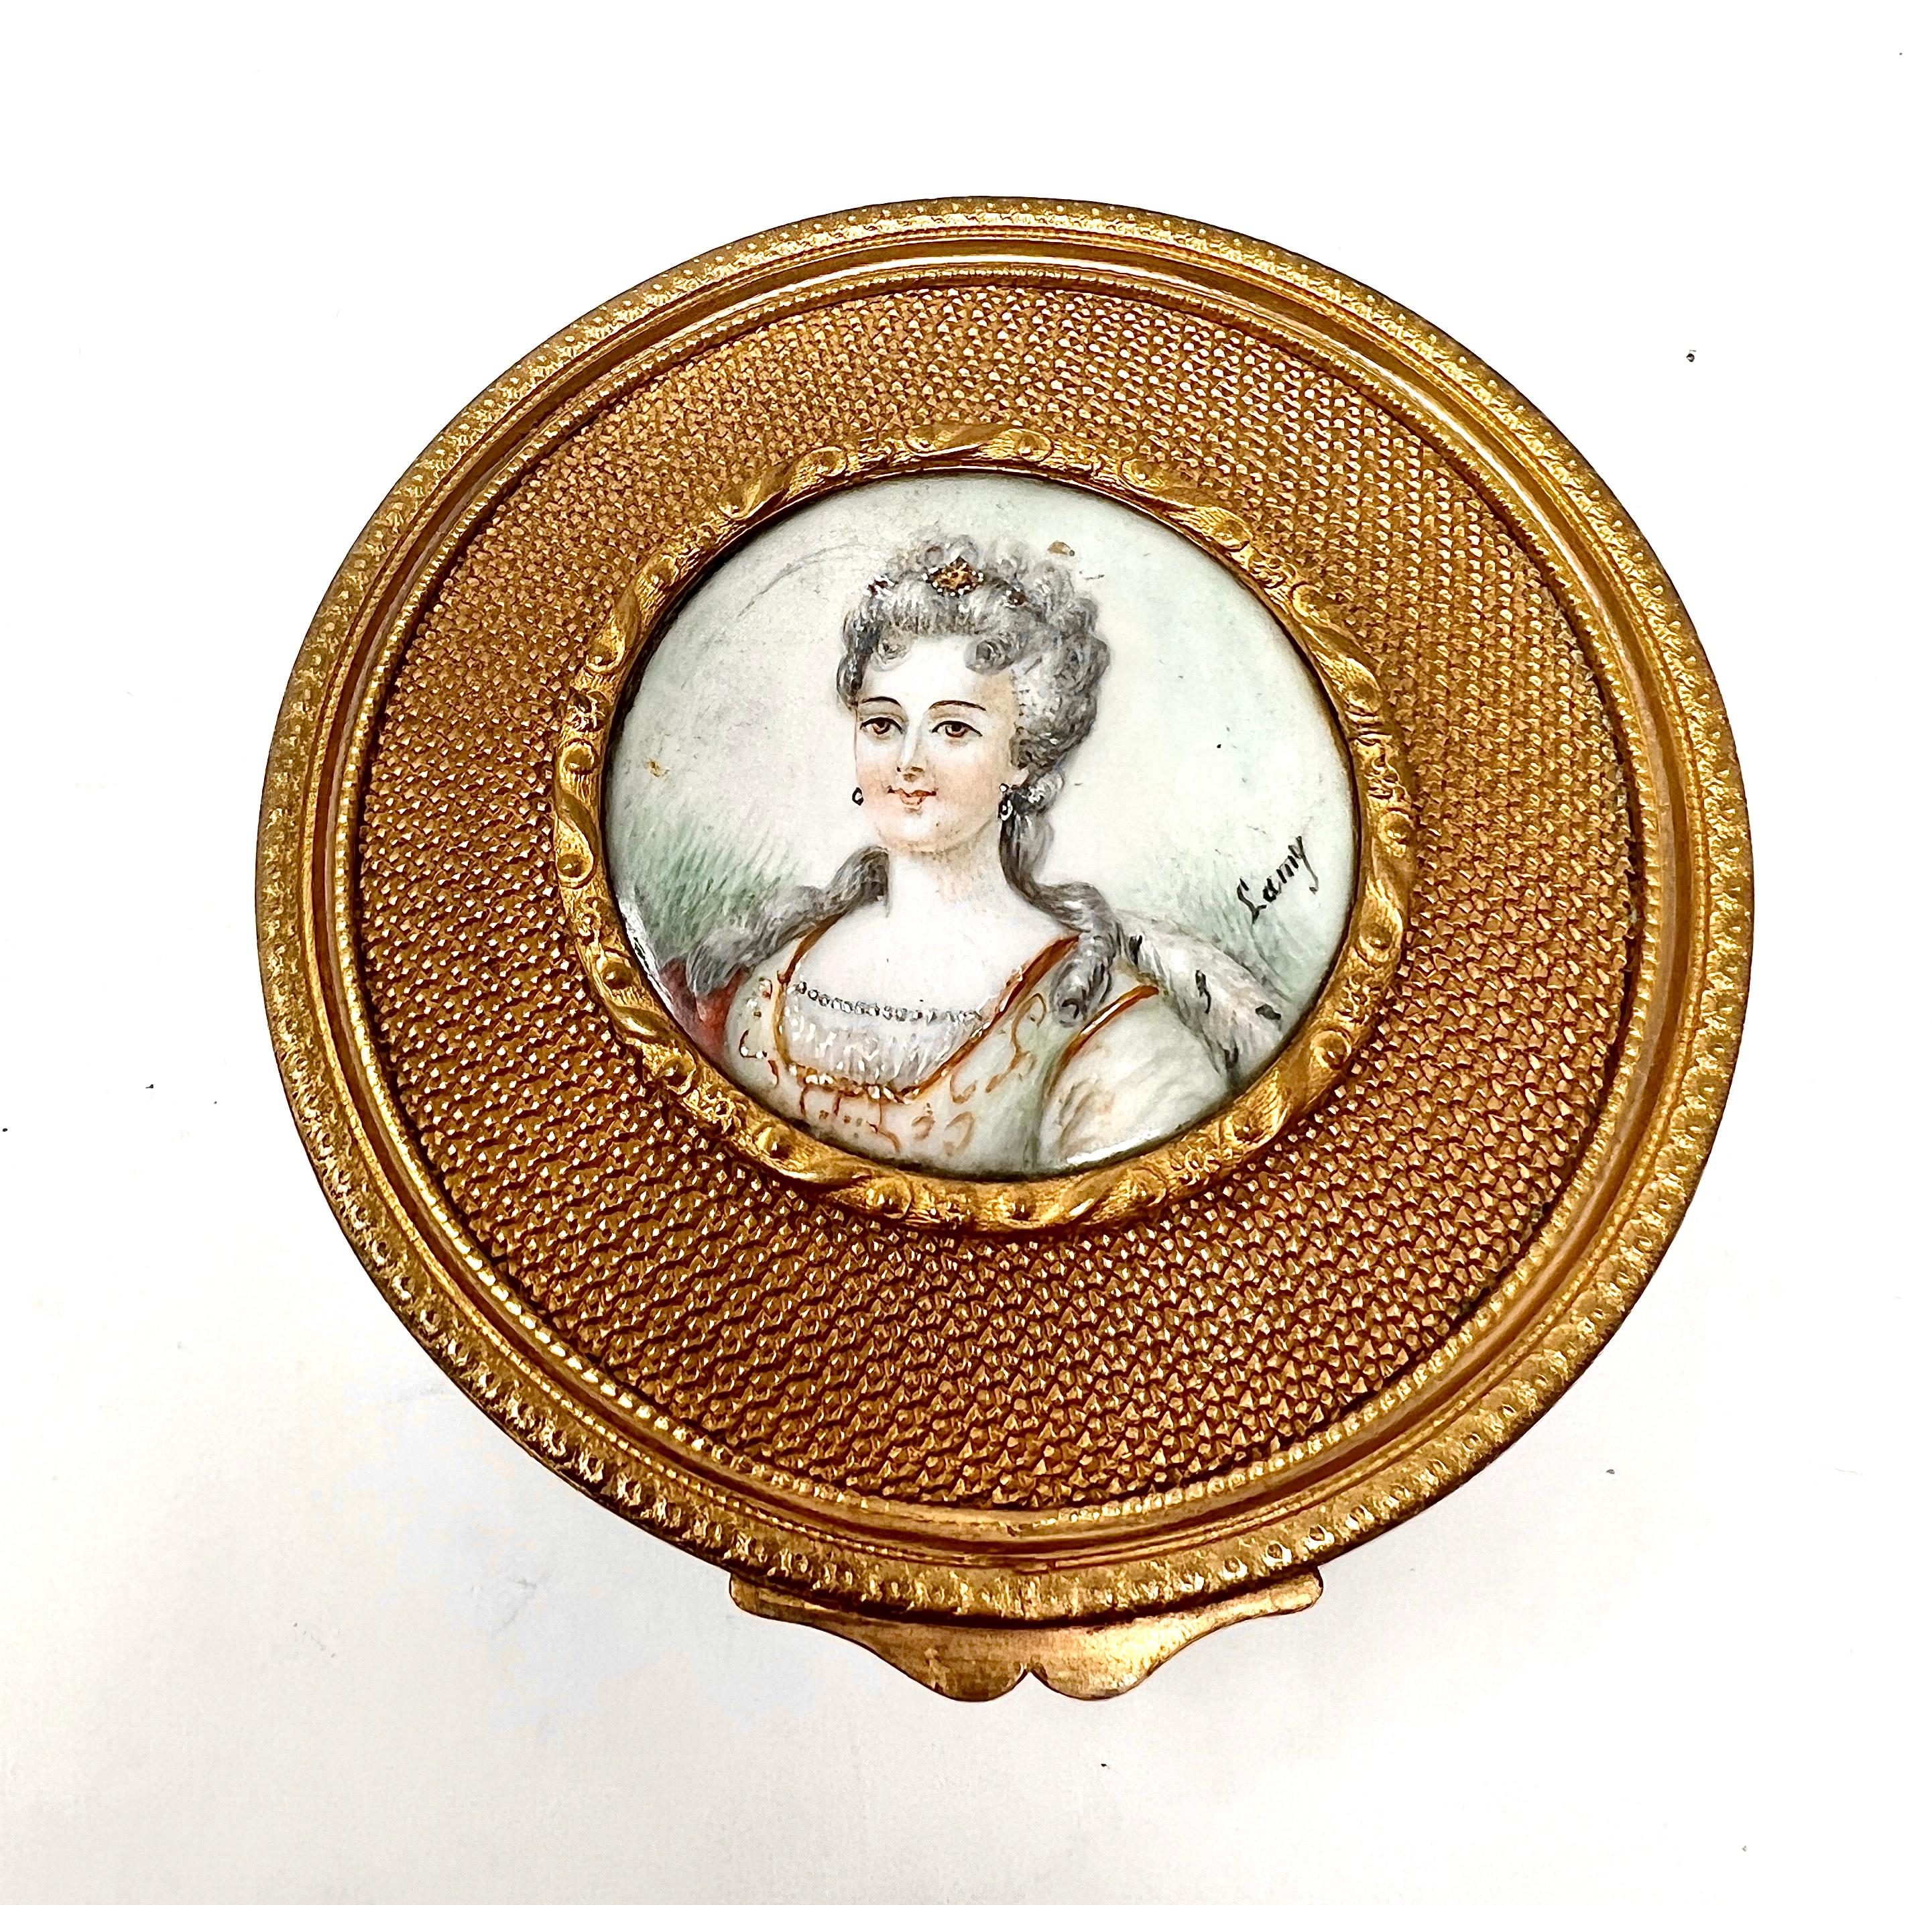 Antique French Gold Bronze Jewel or Trinket Box With Hand Painted Porcelain Miniature, Circa 1880-1890.